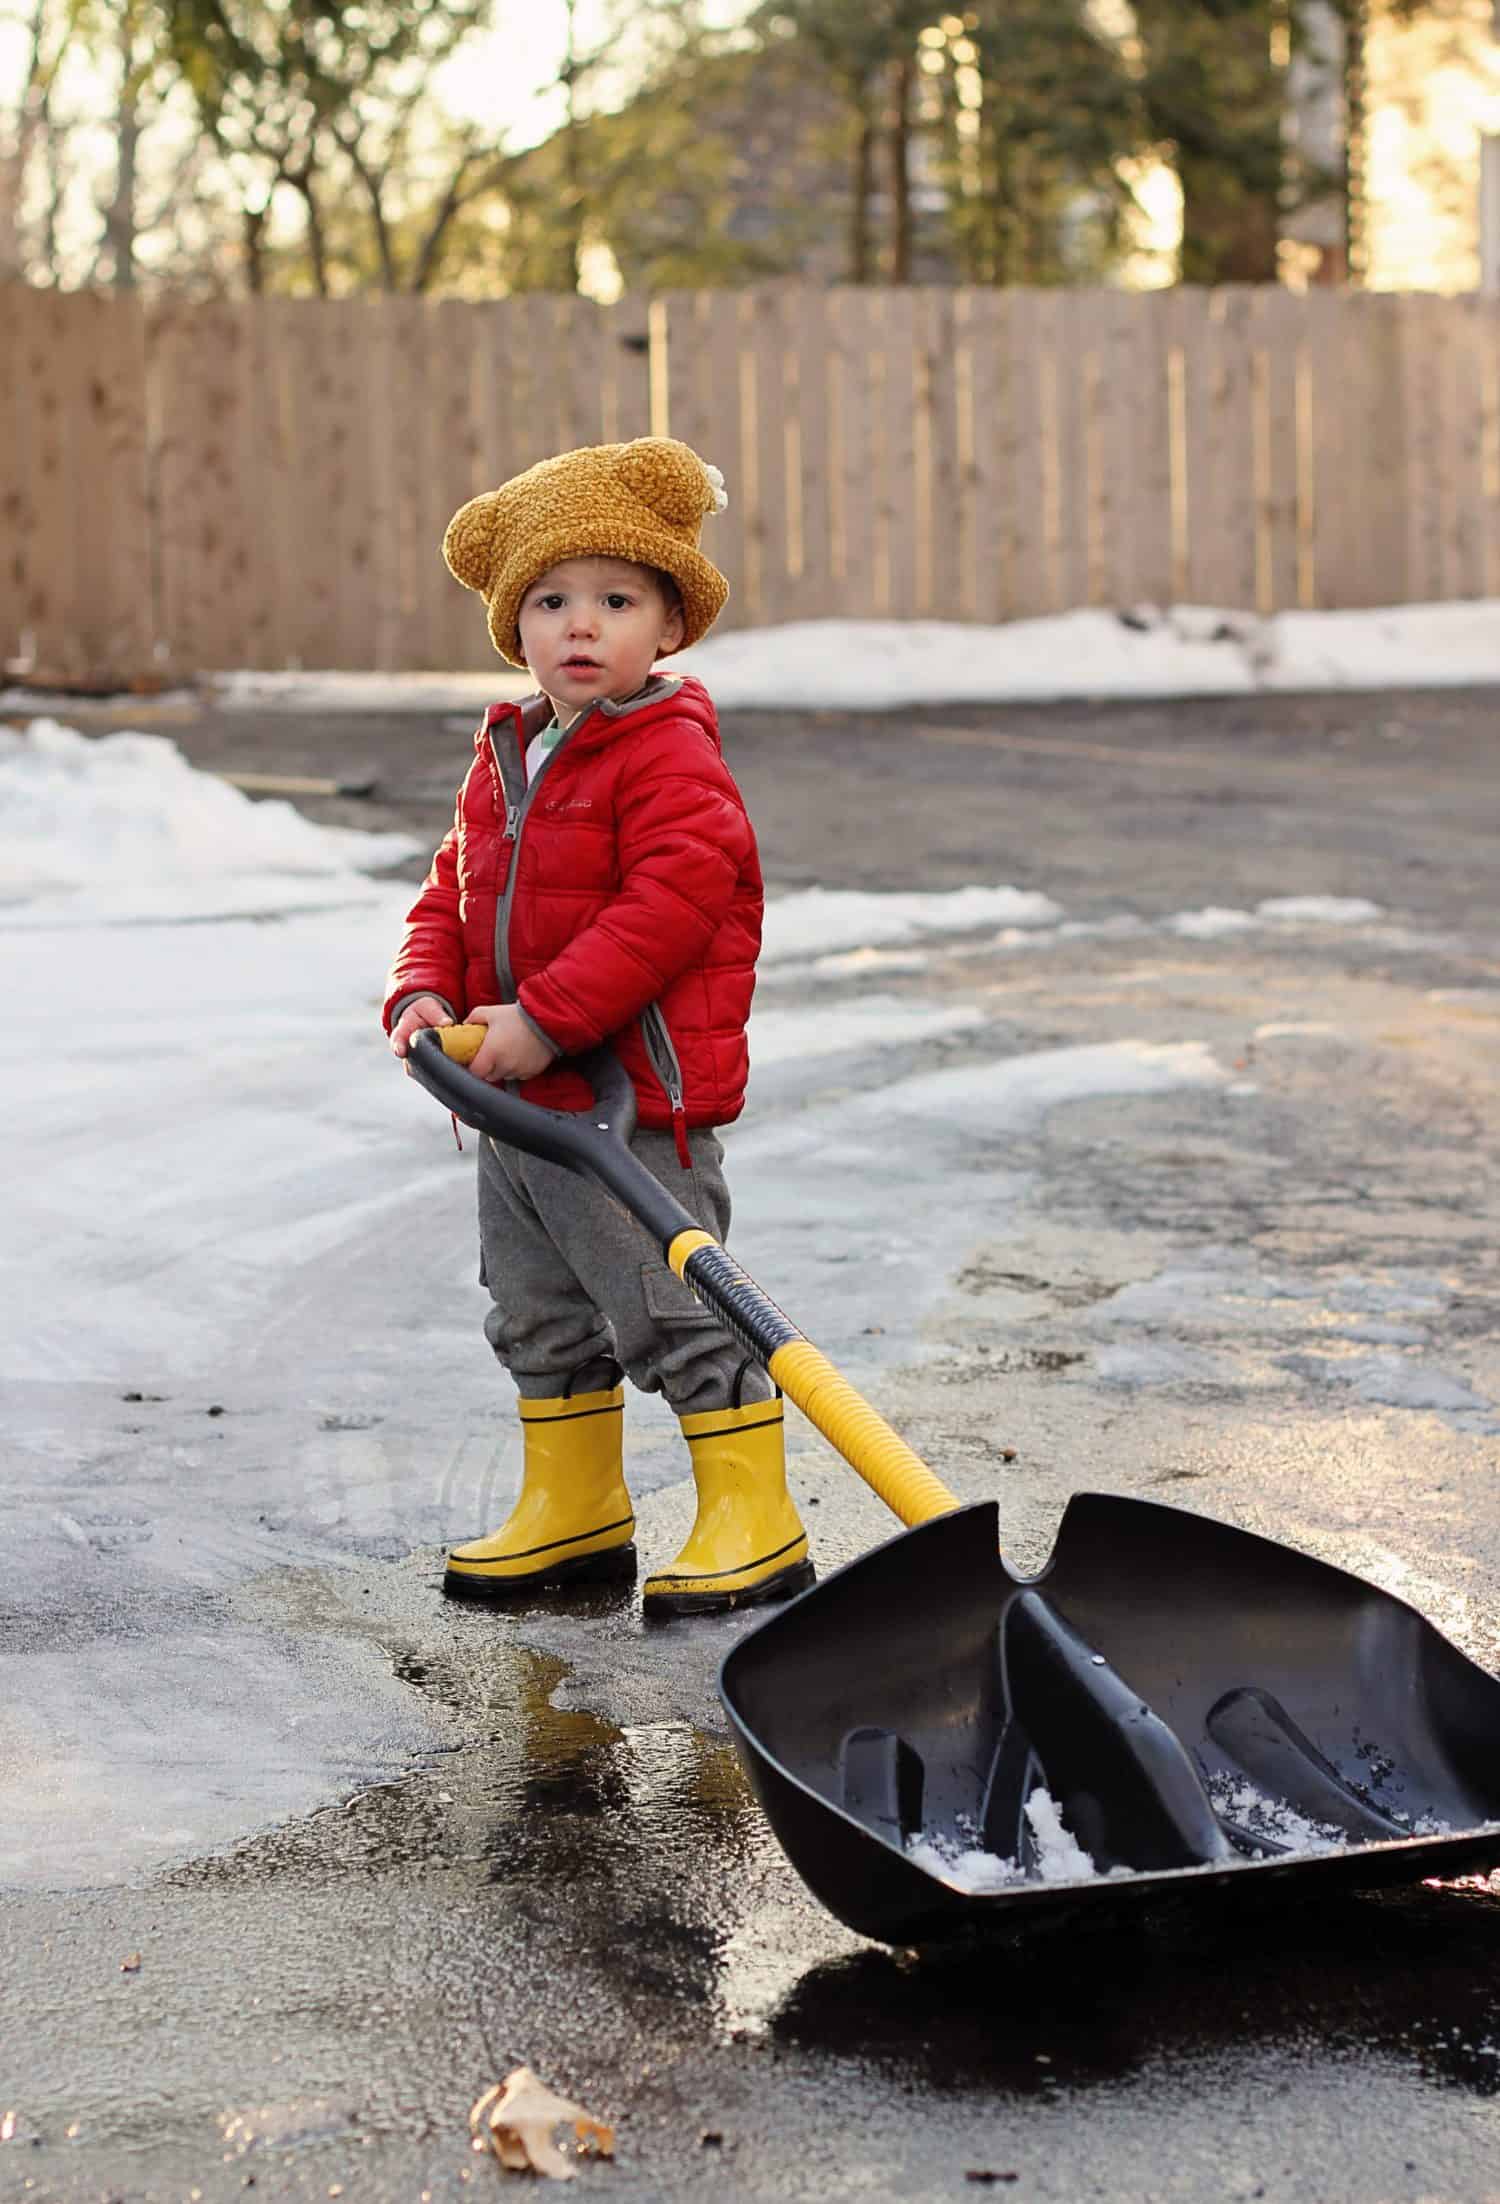 Shovel the driveway - snow day activities